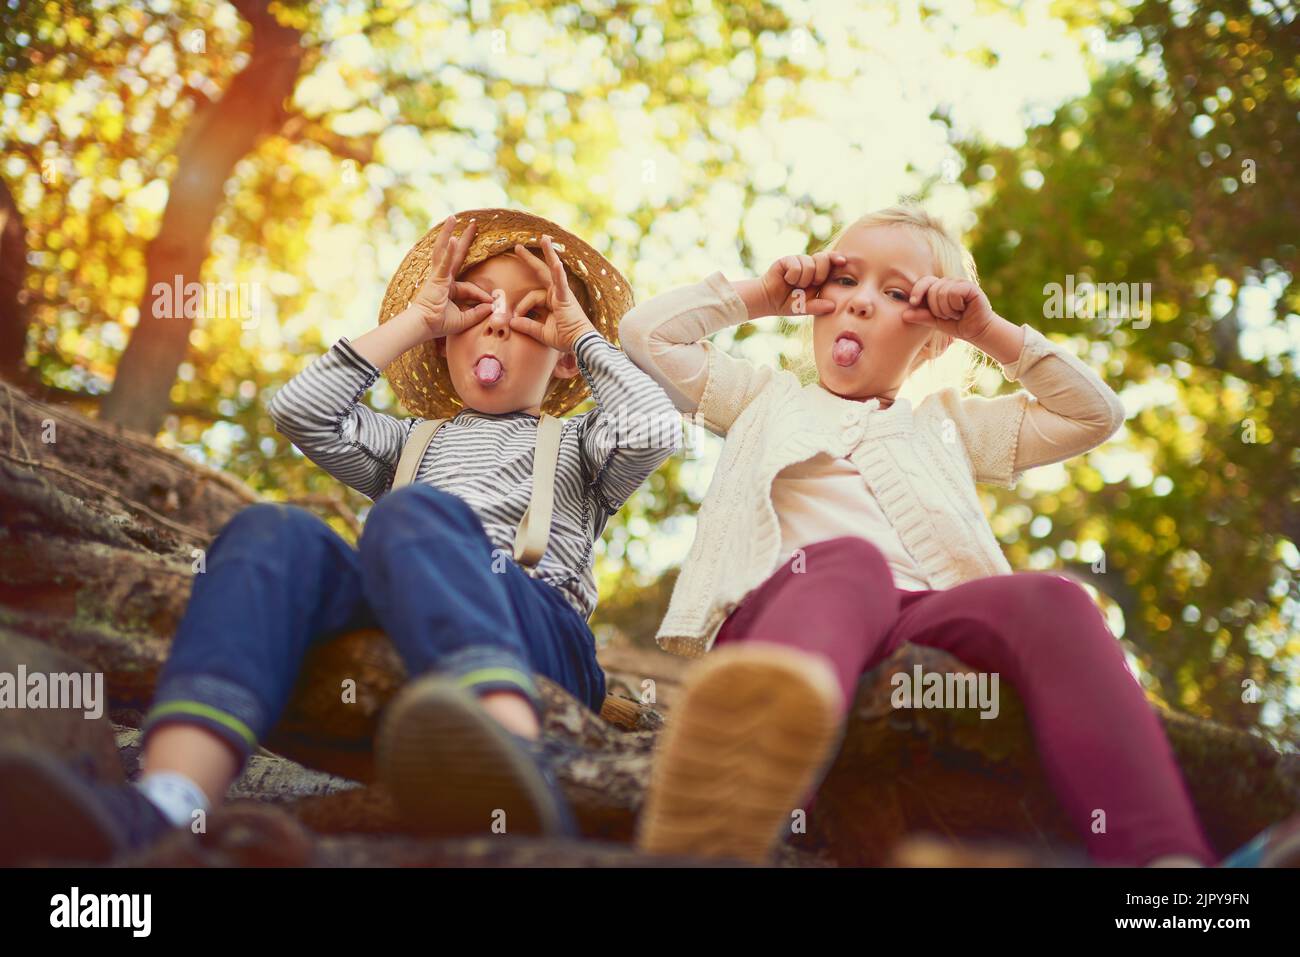 Theyre just being silly. Portrait of two little children playing together outdoors. Stock Photo